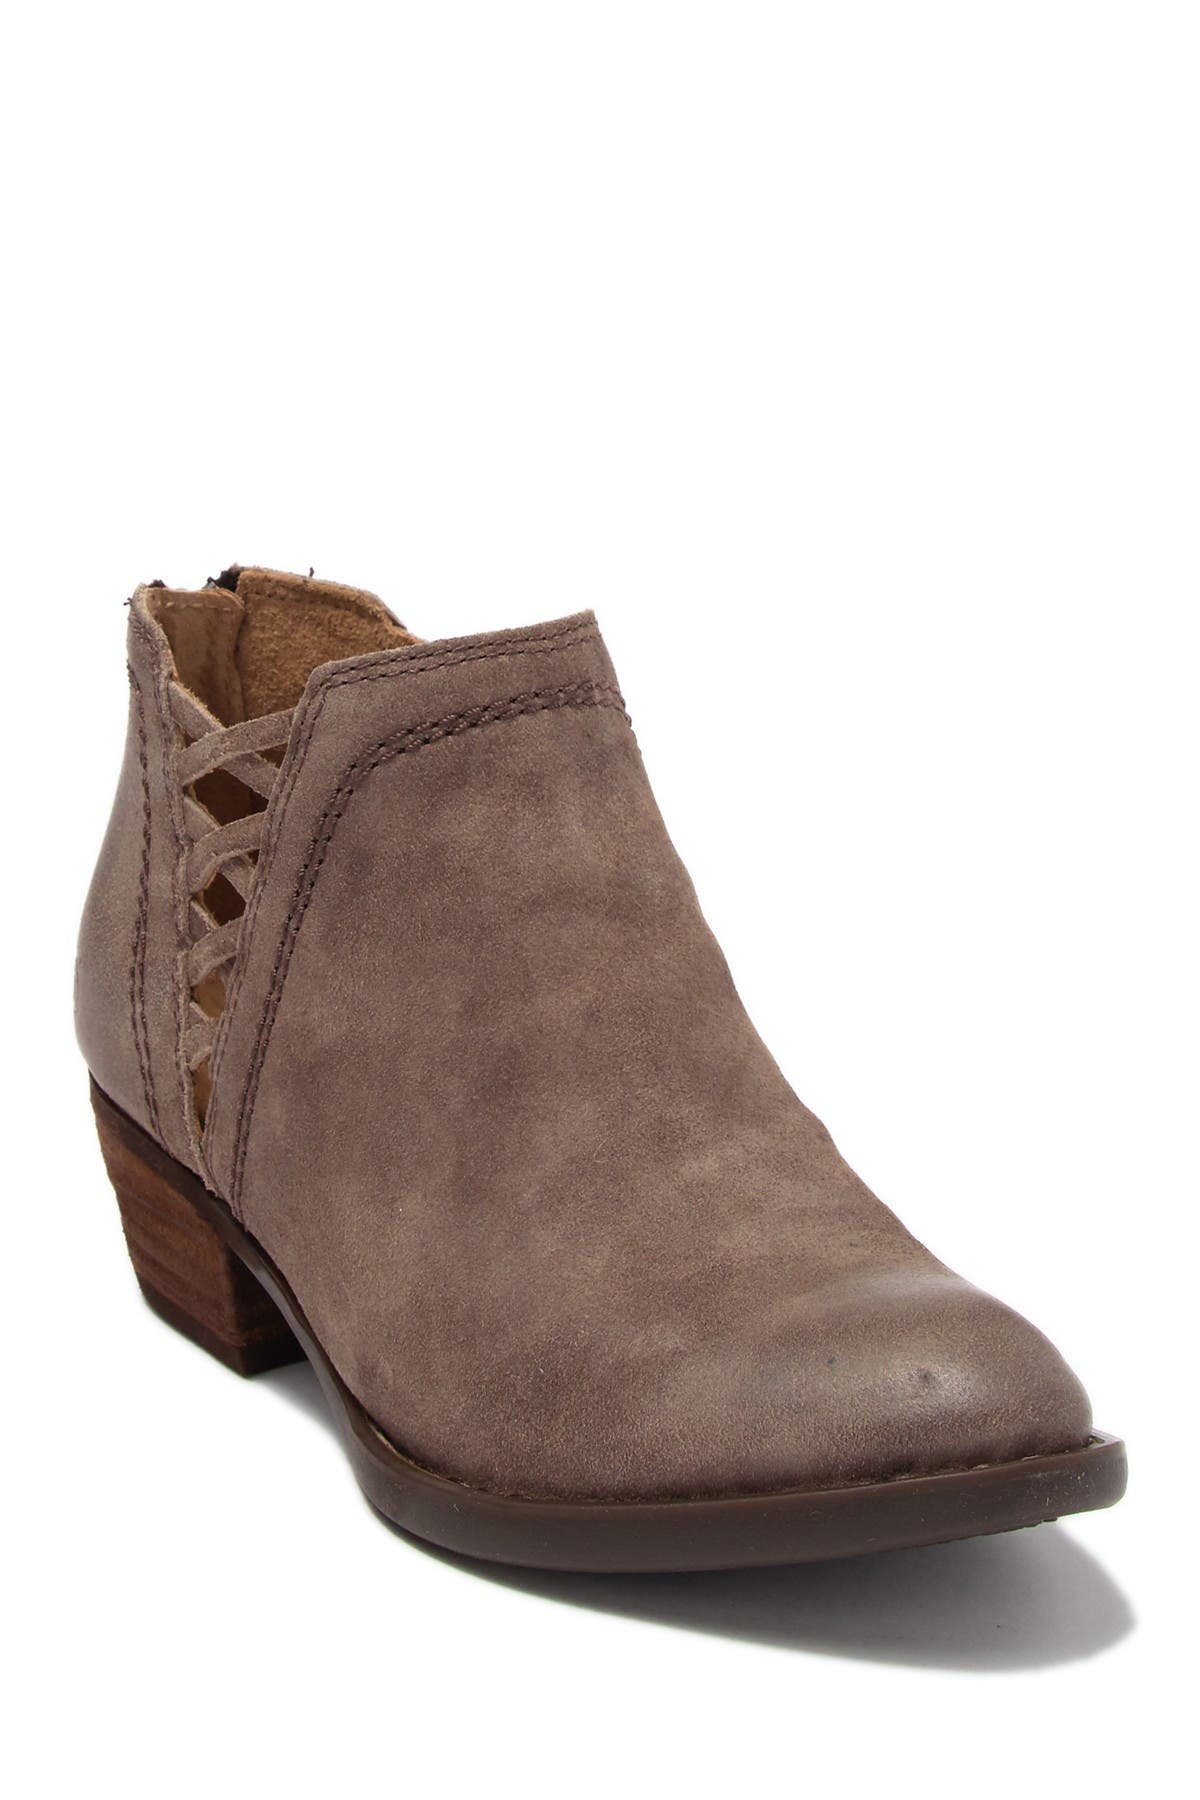 born leather ankle boots